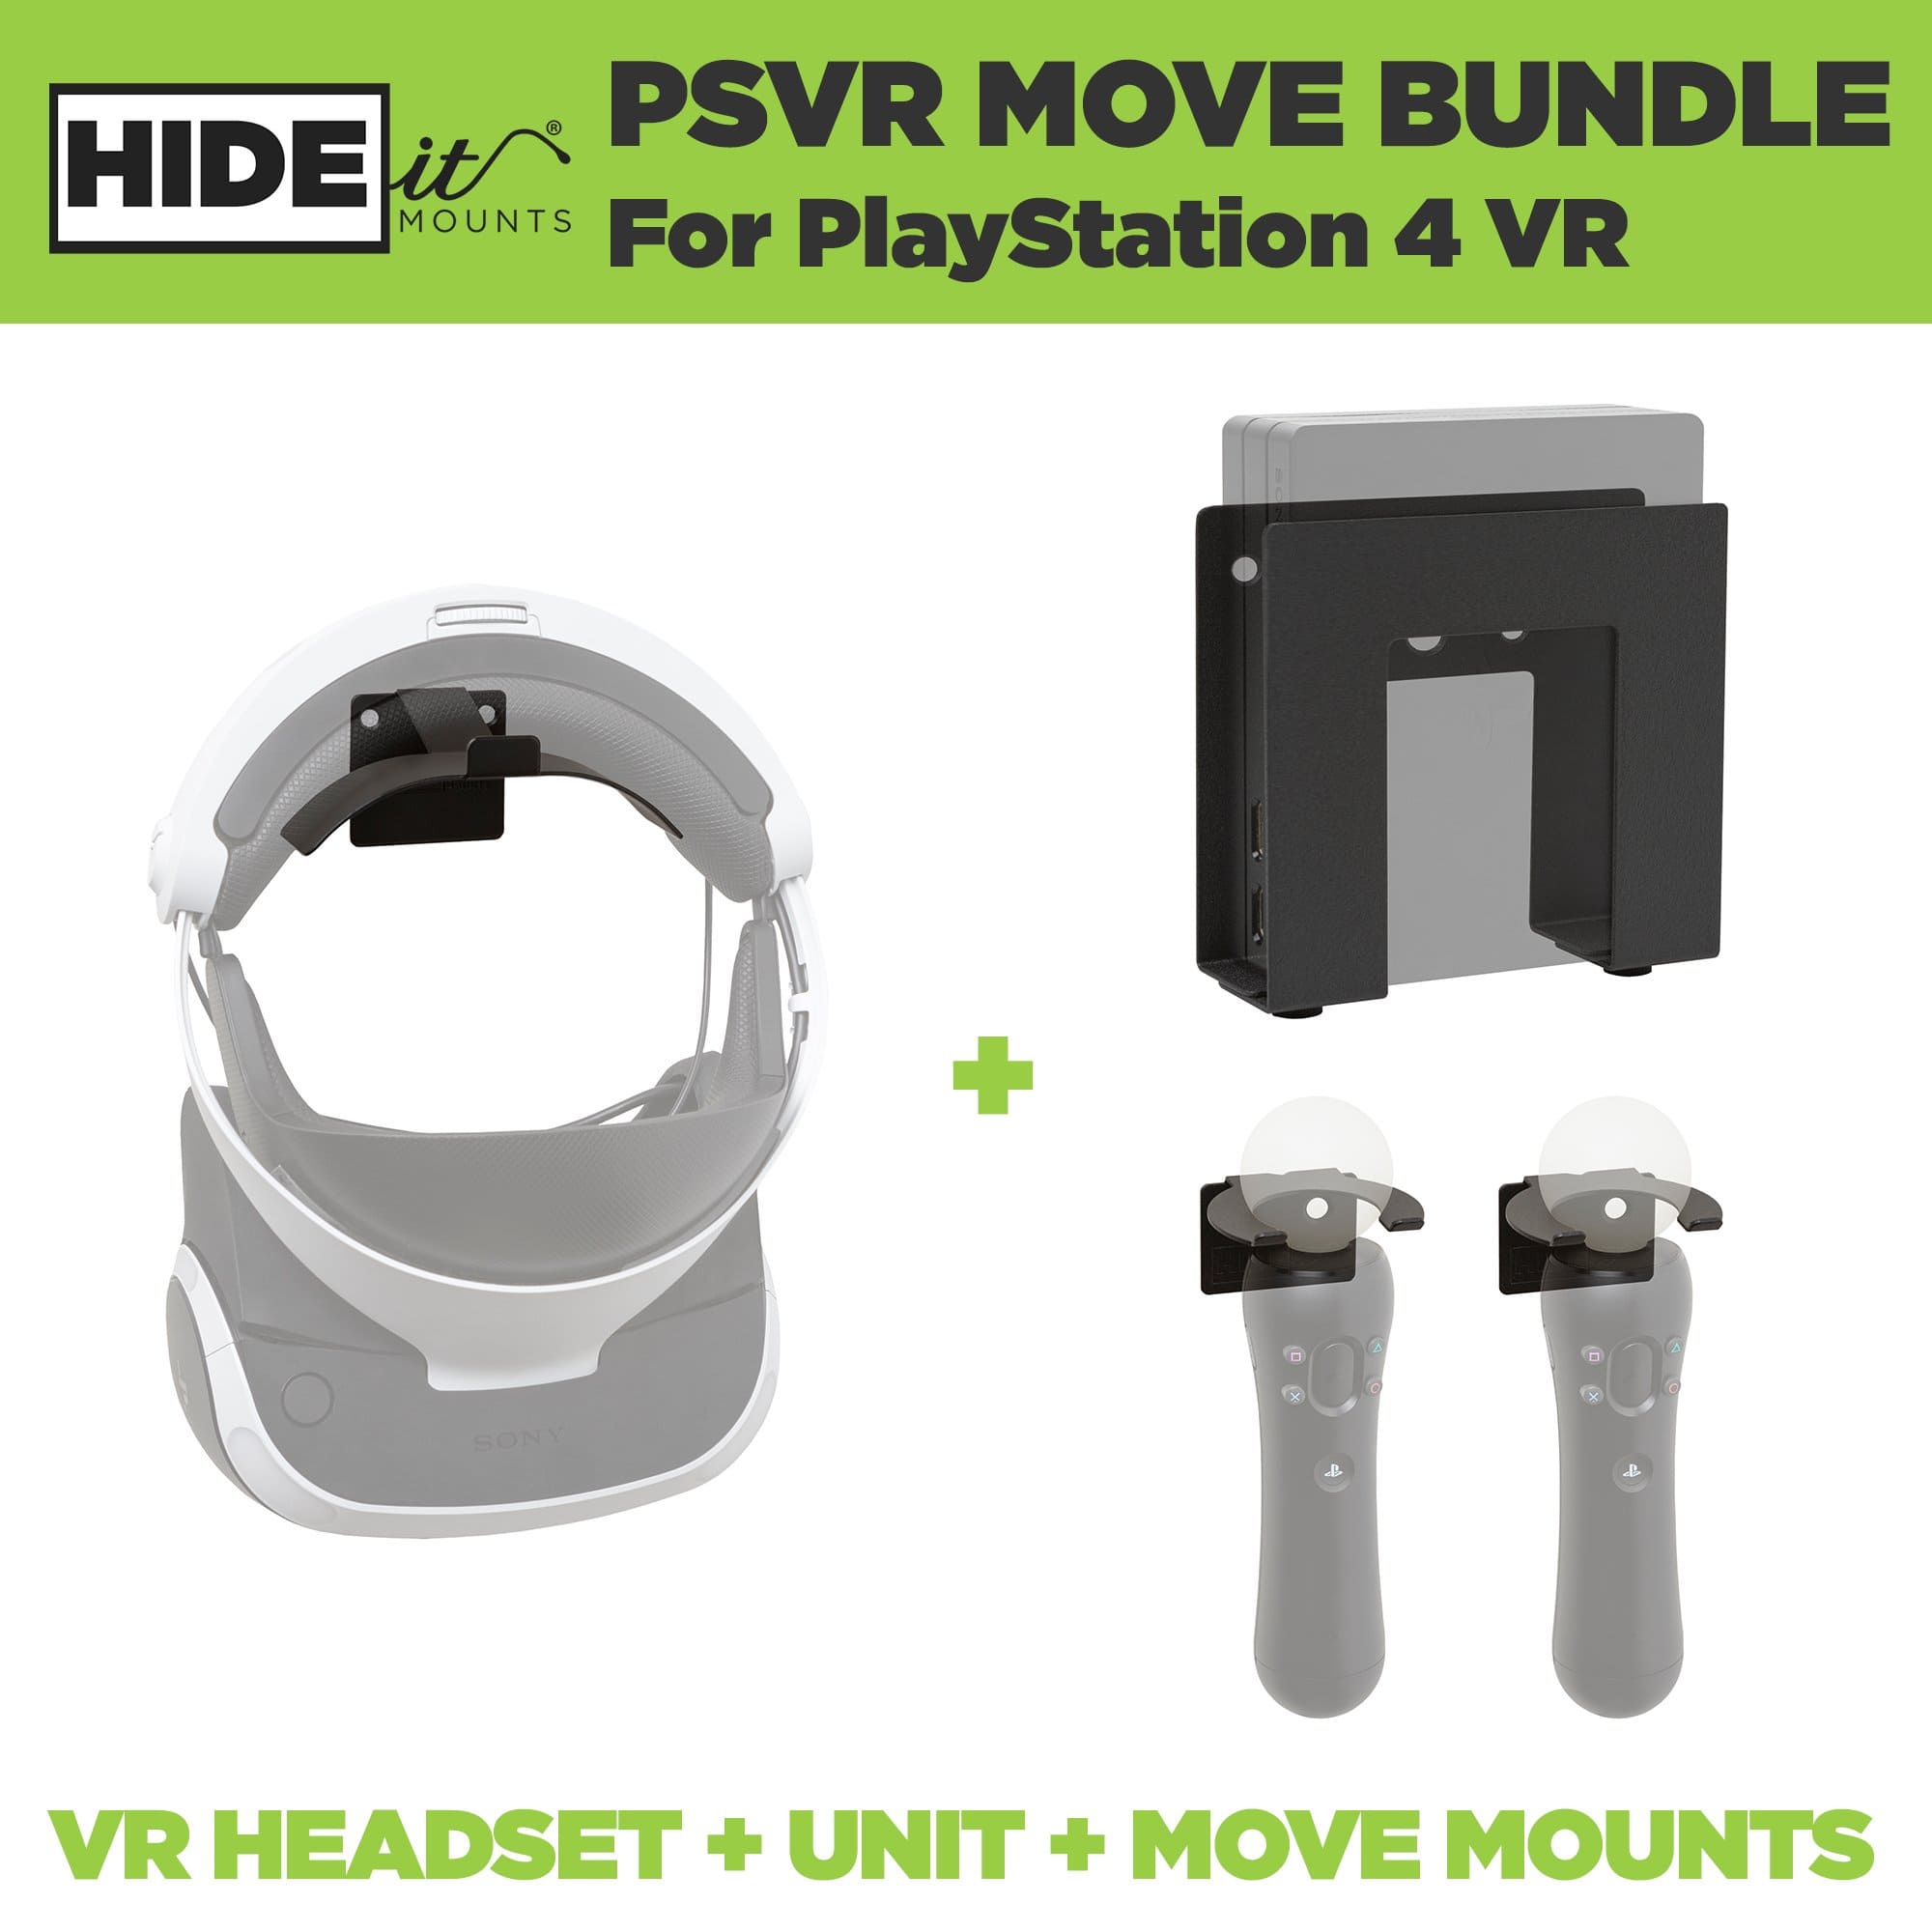 HIDEit Mounts for PSVR headset, PSVR Processor and PlayStation Move Controllers.